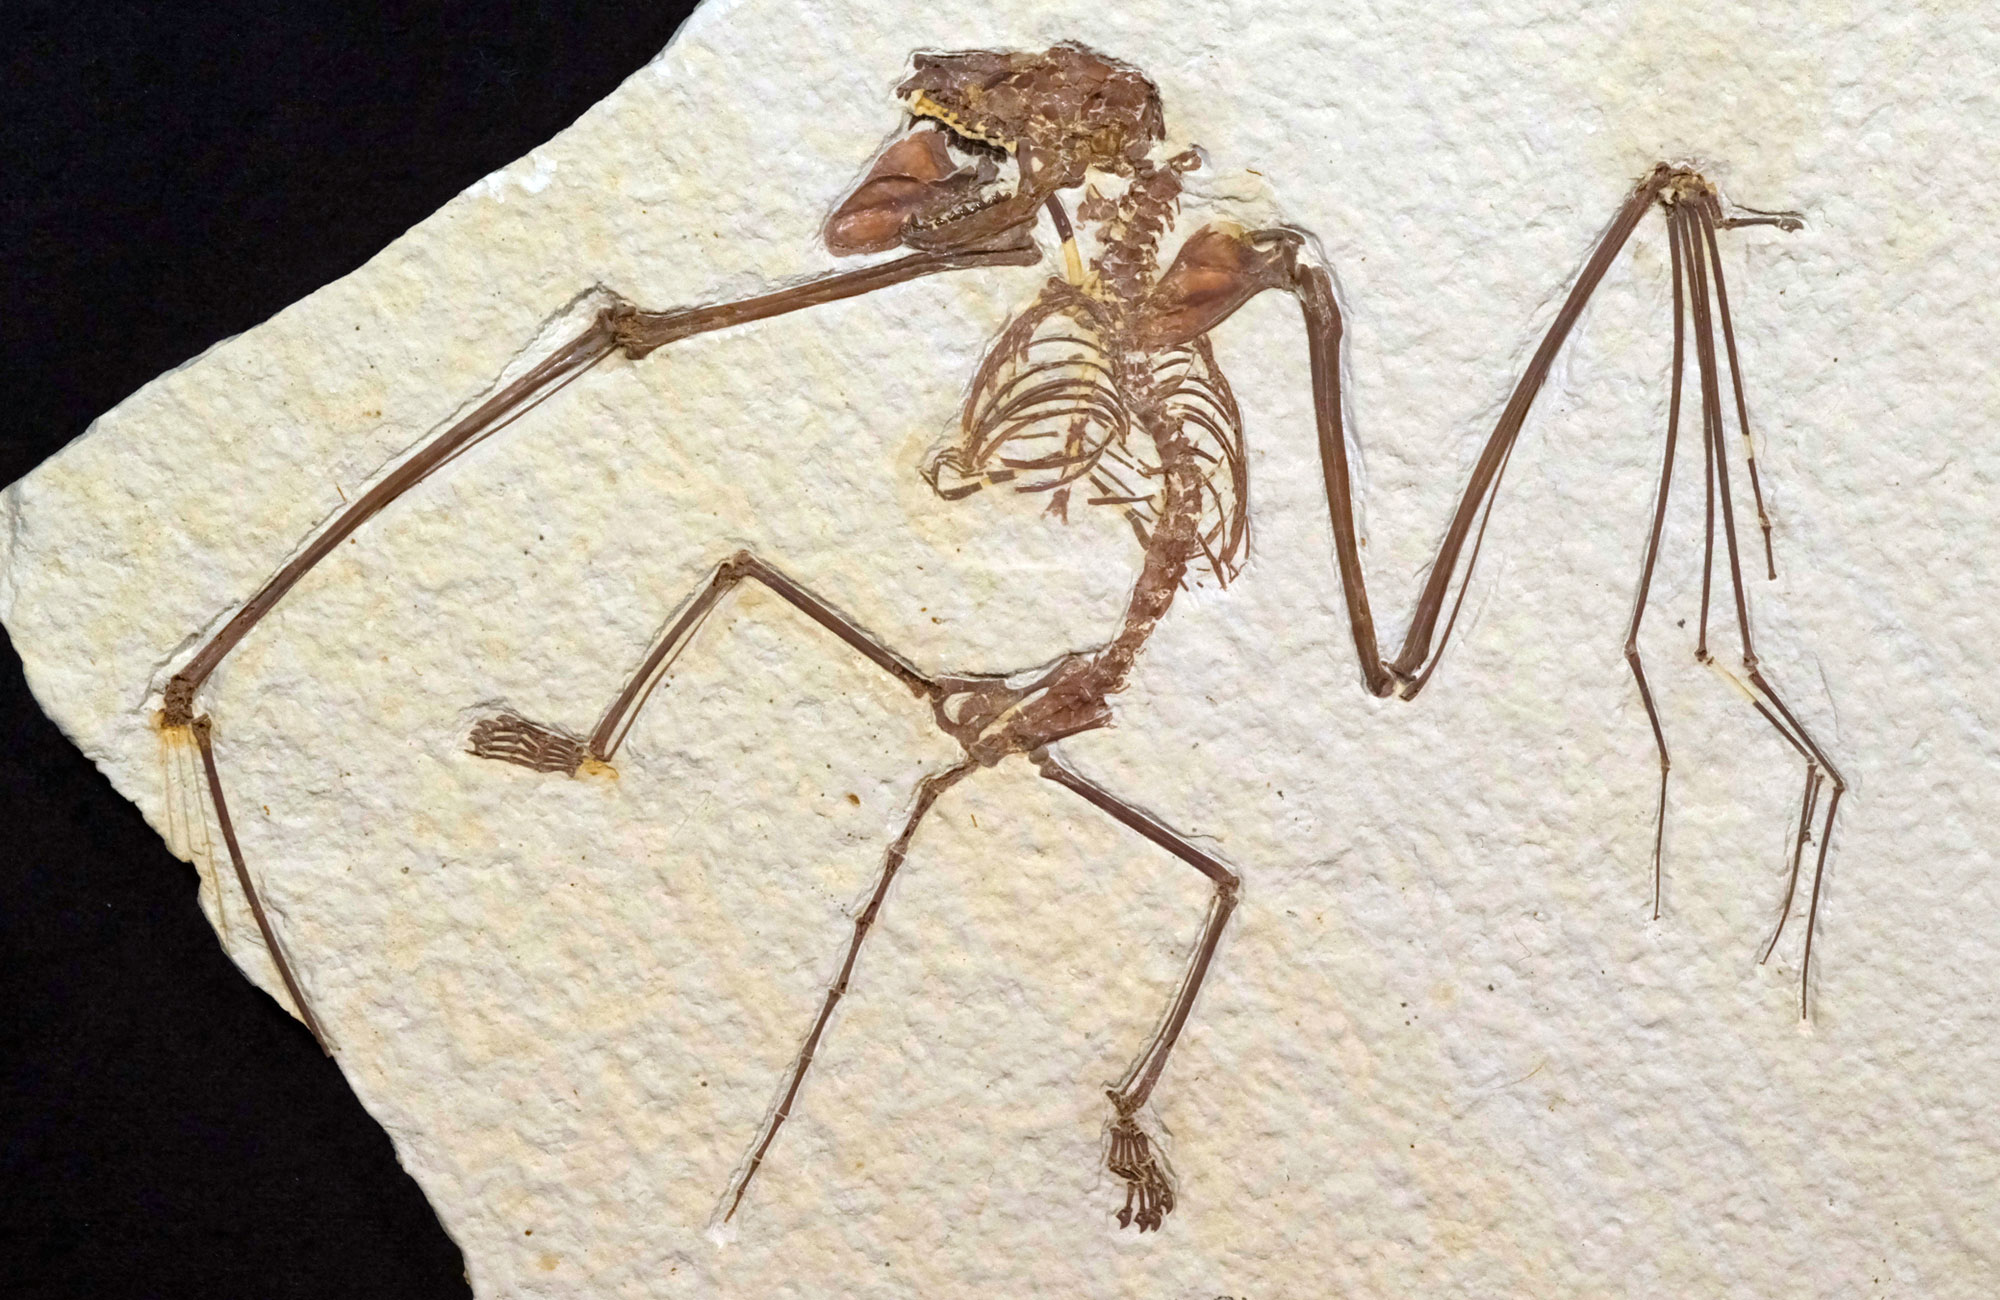 Photograph of a fossil bat from Fossil Butte National Monument, Wyoming. The photo shows a nearly complete, articulated bat skeleton made up of brown bones preserved on an off-white slab of rock. The bat's head is turned to the left. 